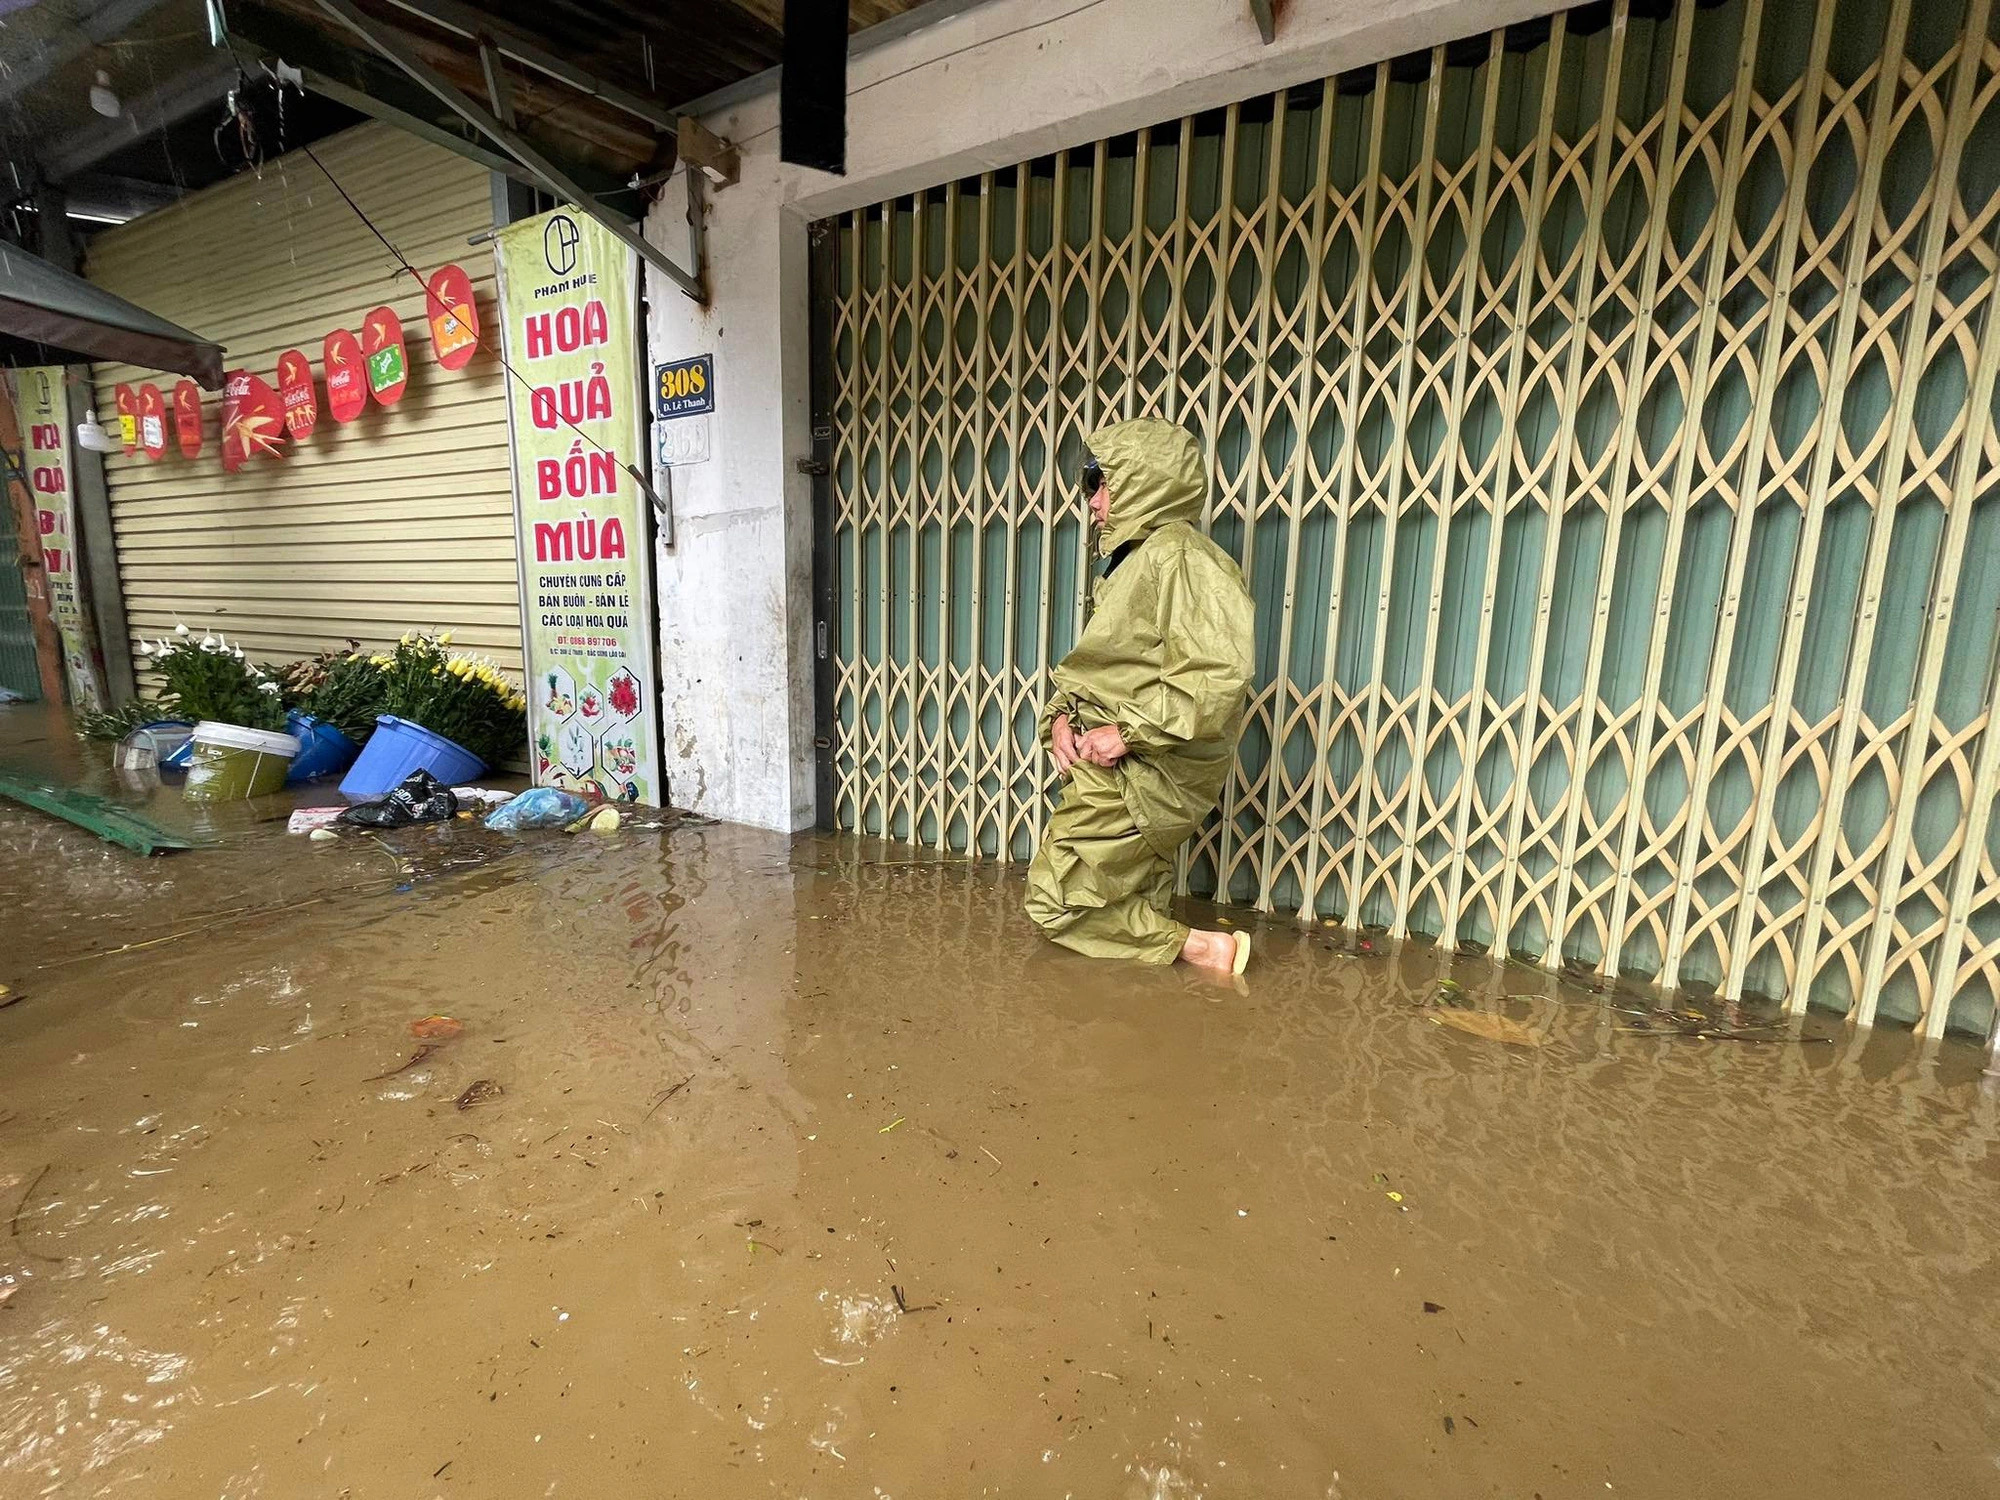 Le Thanh Street in Bac Cuong Ward of Lao Cai City was 50-80cm deep in rainwater, and even over 80cm in some parts, causing damage to residents’ properties. Photo: Tien Ngoc / Tuoi Tre